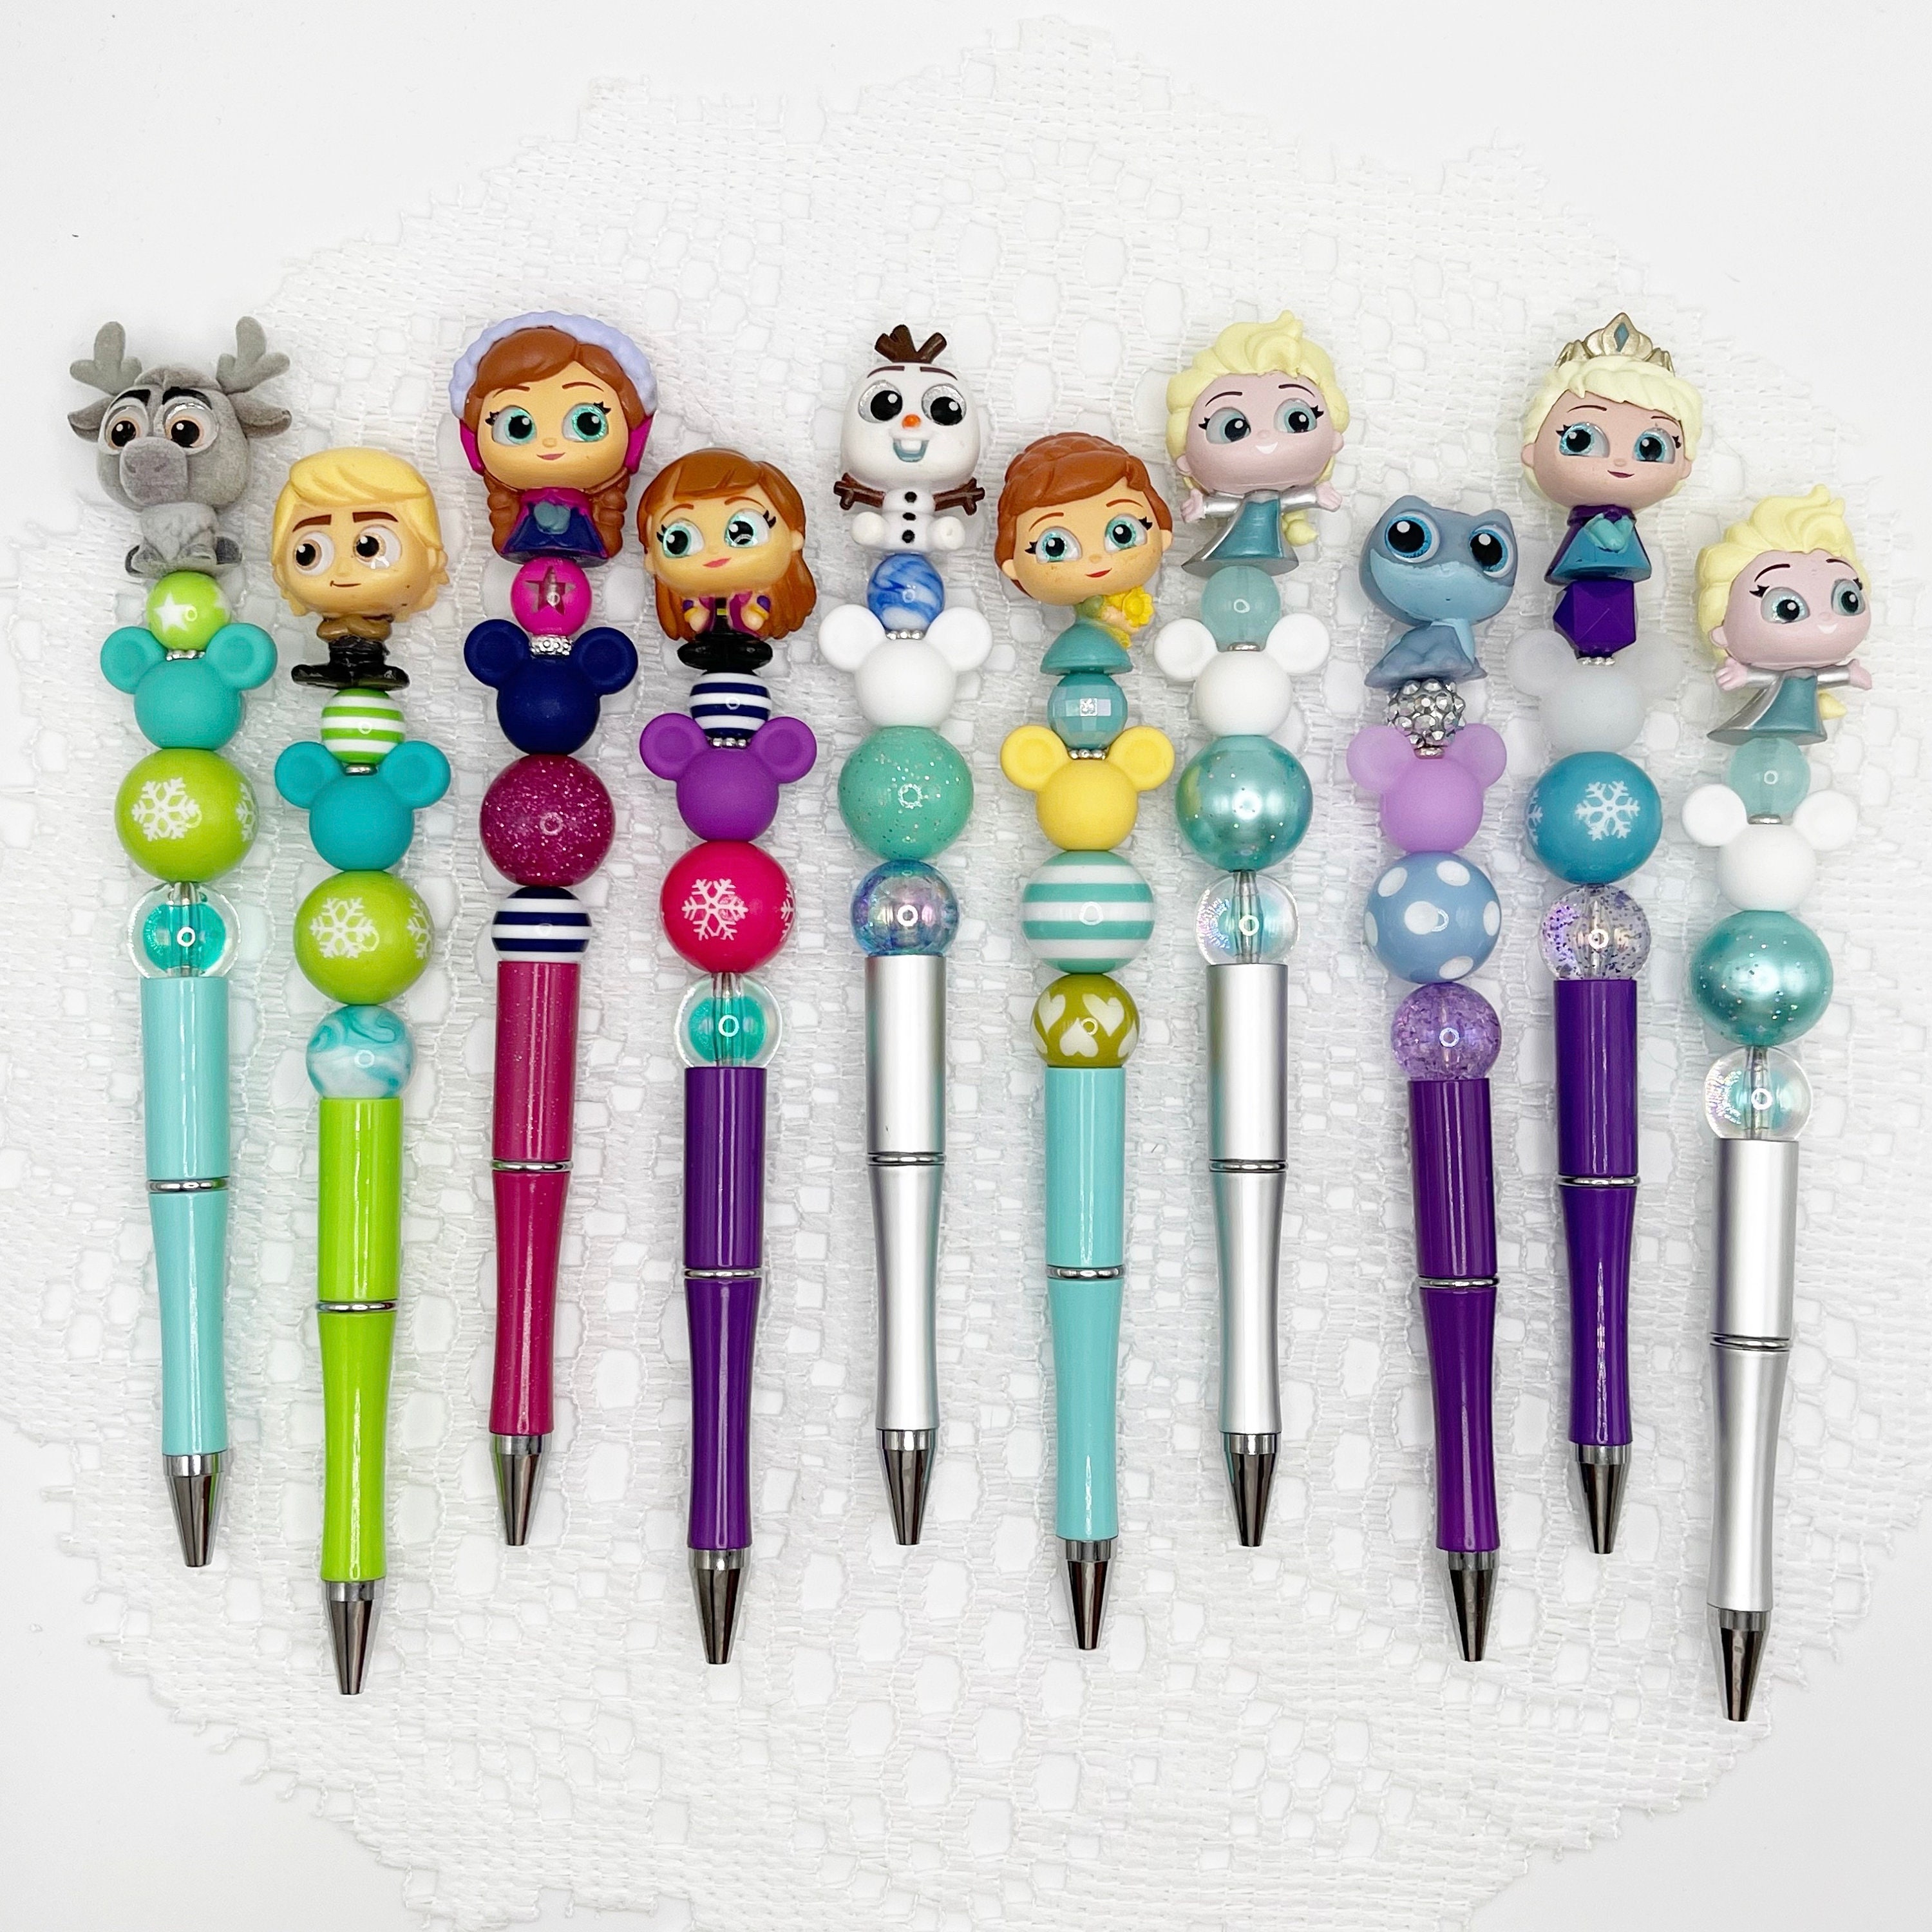 TinyTales Frozen Stationary Set for Girls - Pencils